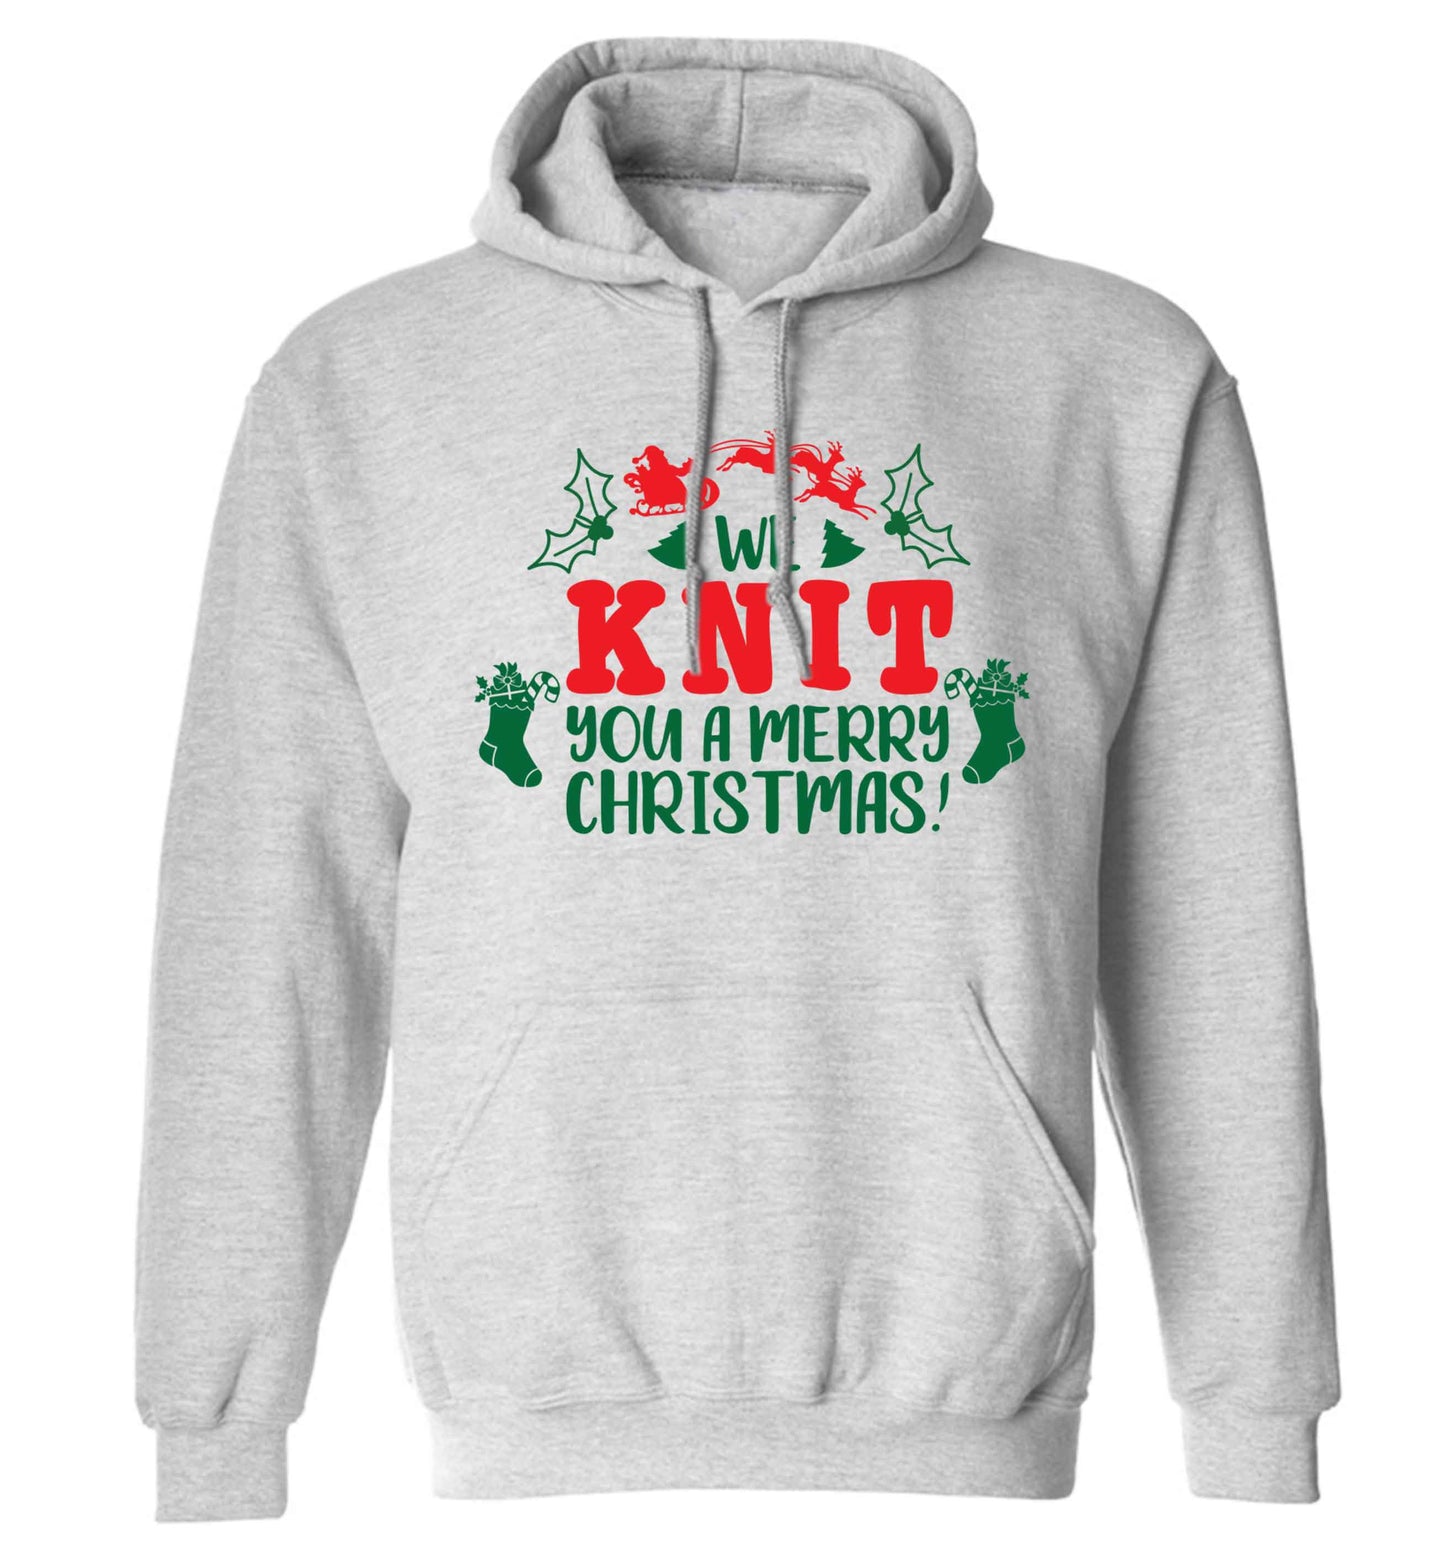 We knit you a merry Christmas adults unisex grey hoodie 2XL